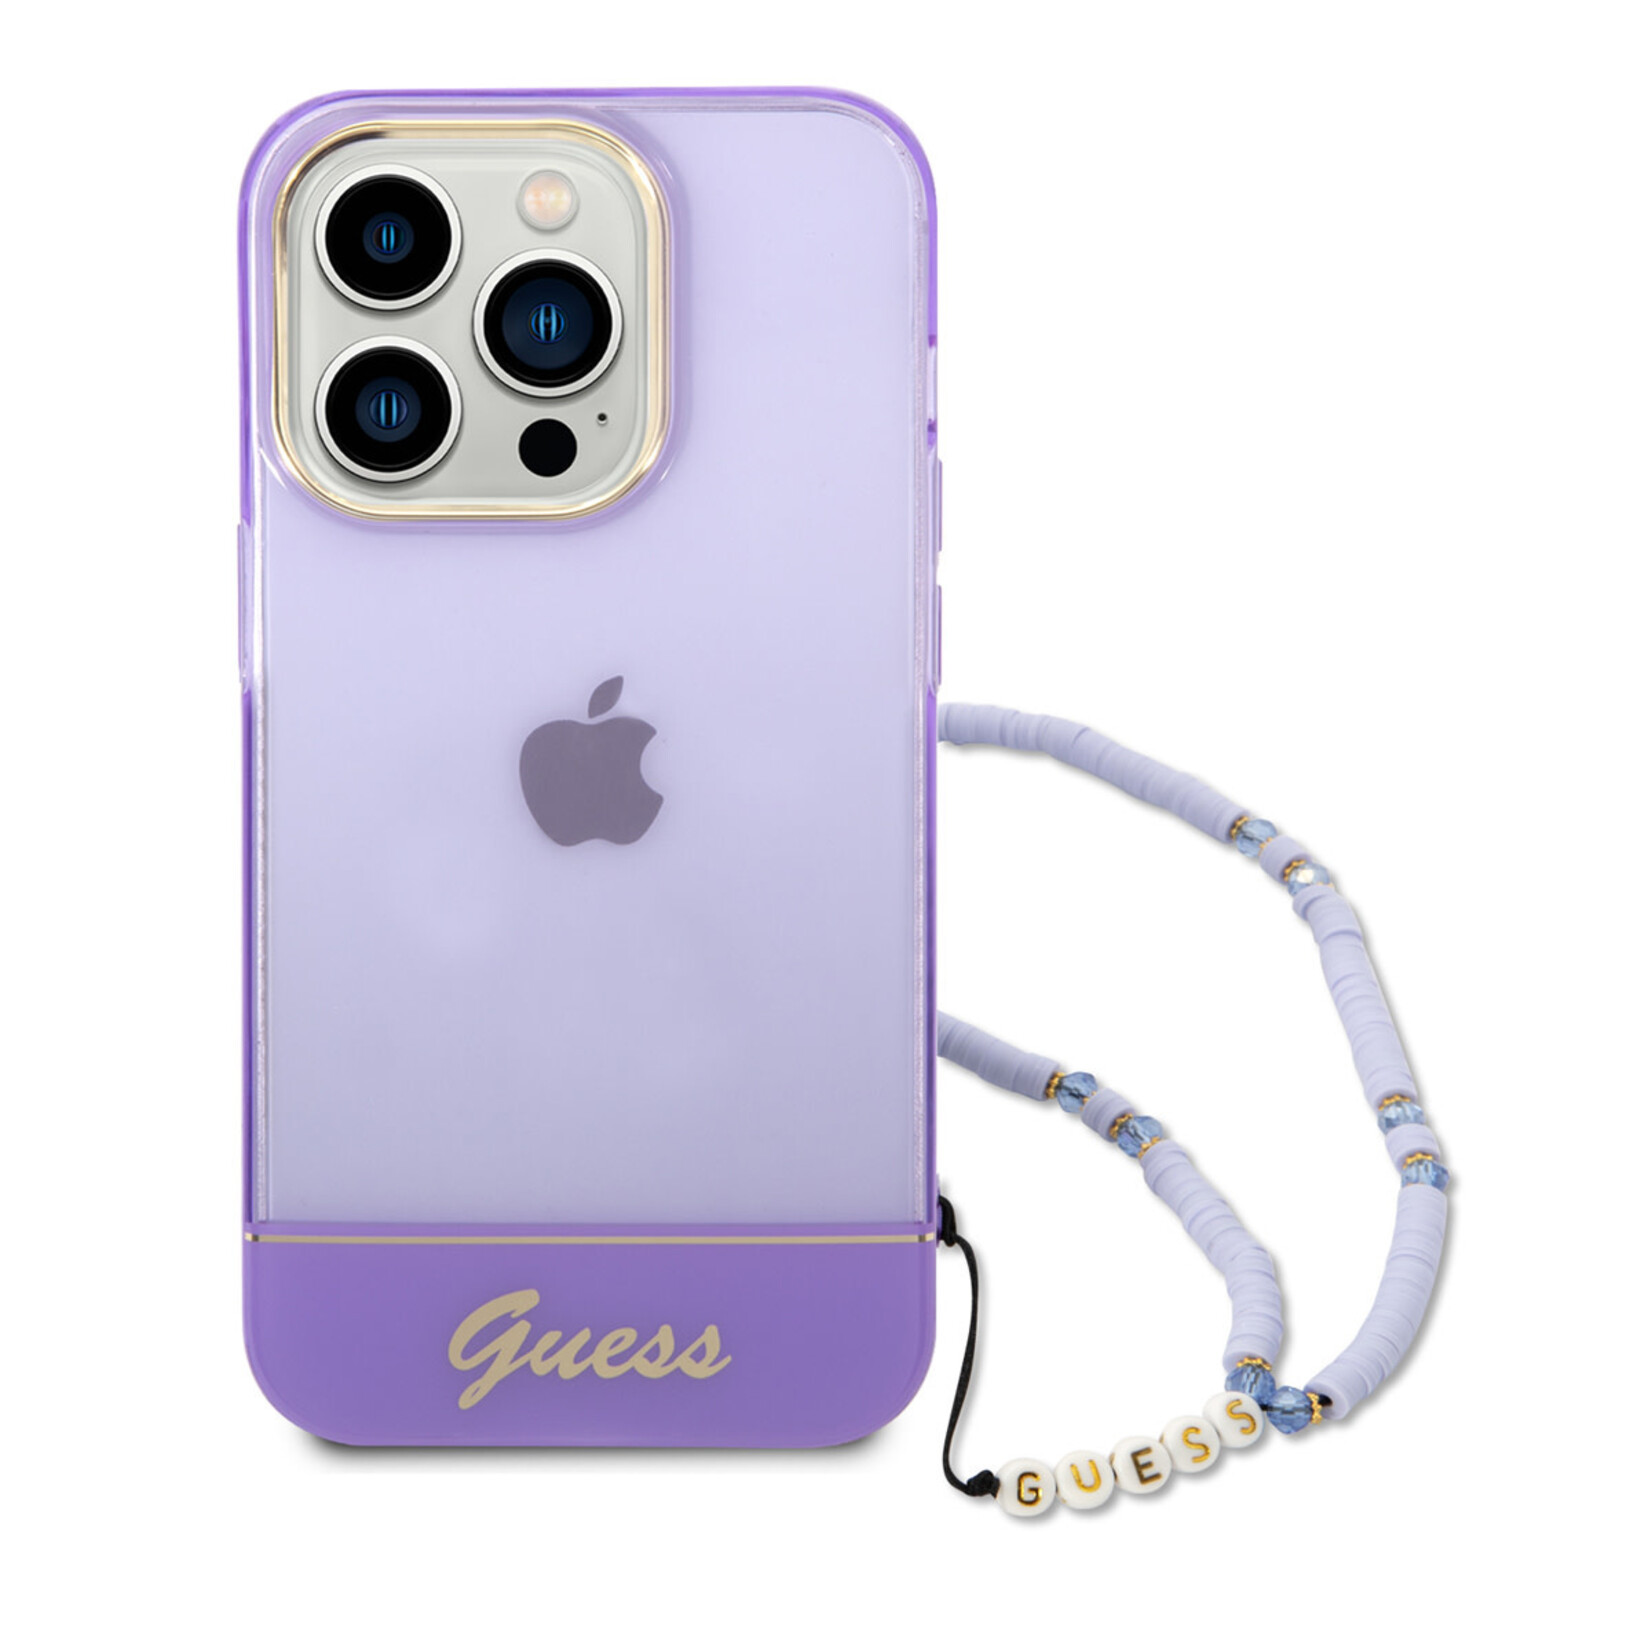 Guess Guess Telefoonhoesje voor Apple iPhone 14 Pro | Paars Transparant | TPU Bescherming | Back Cover